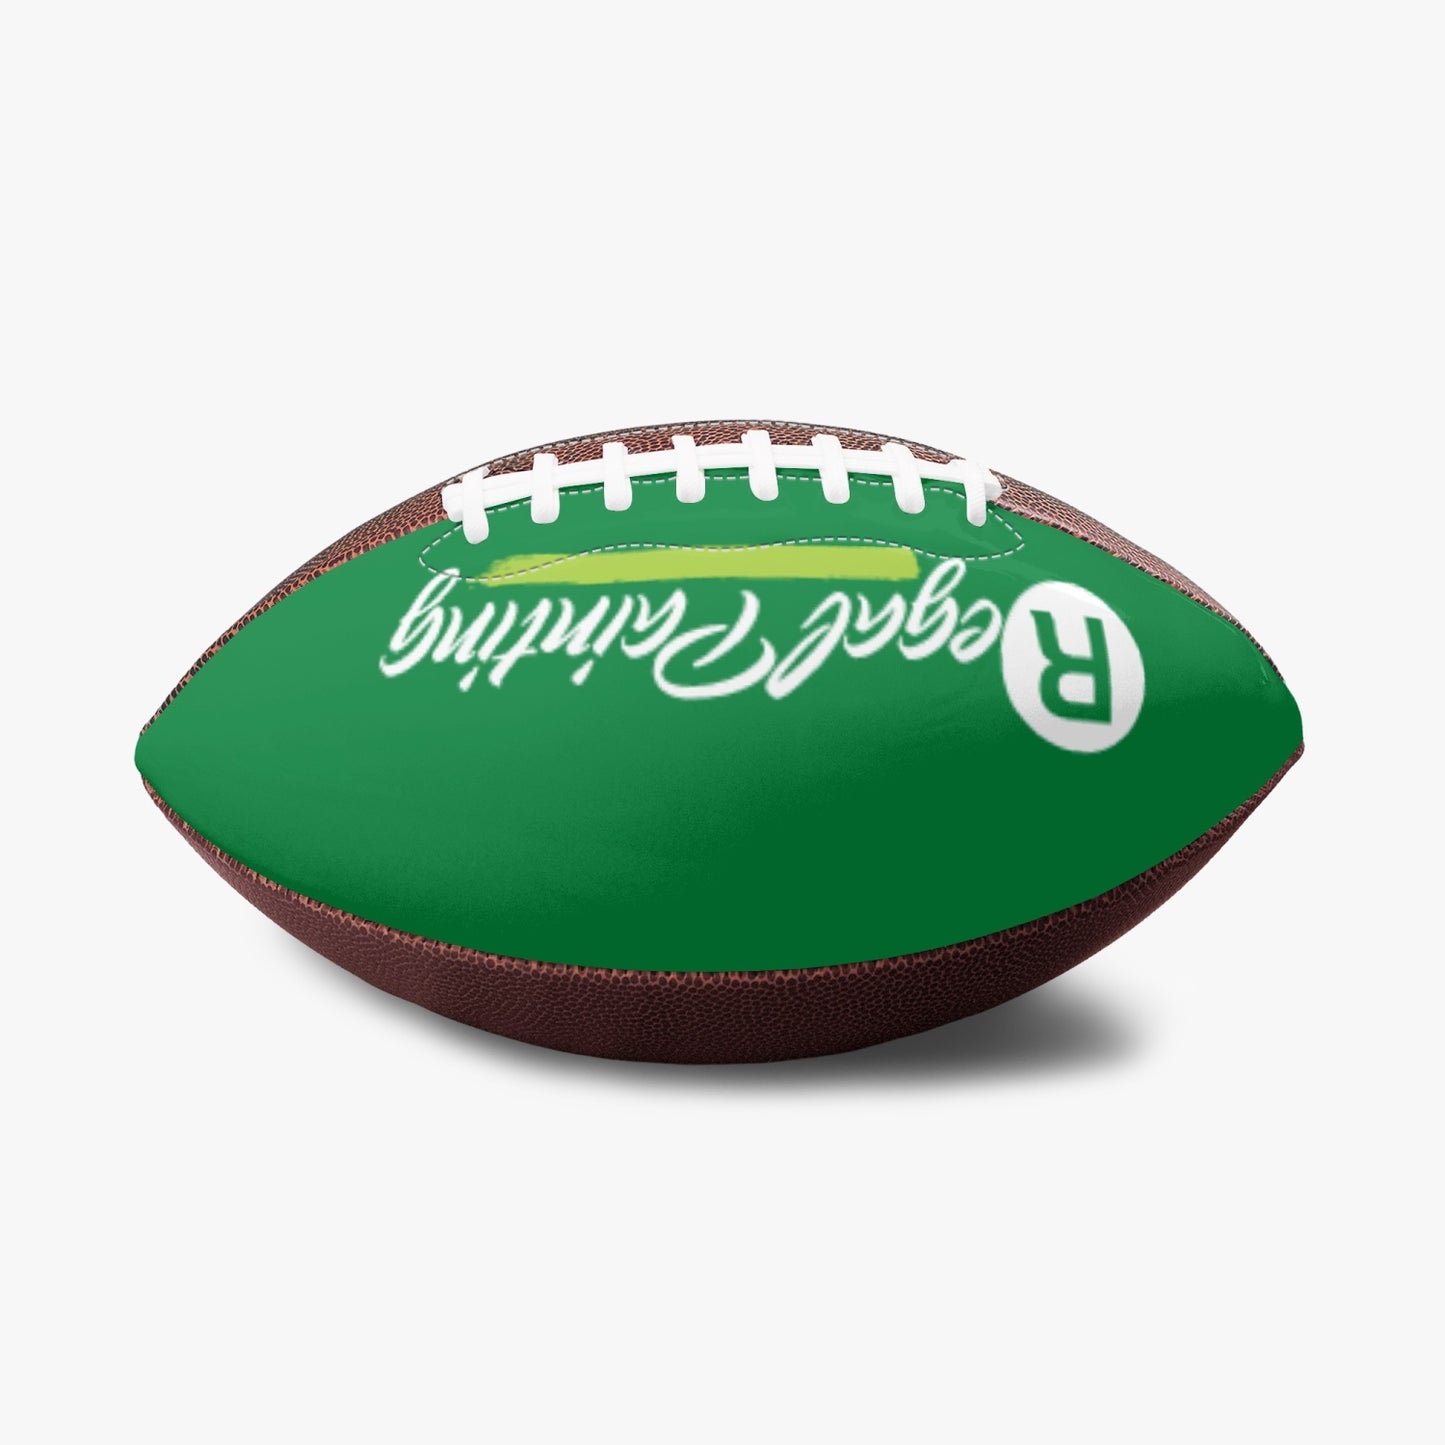 Official NFL size Football- Regal Painting